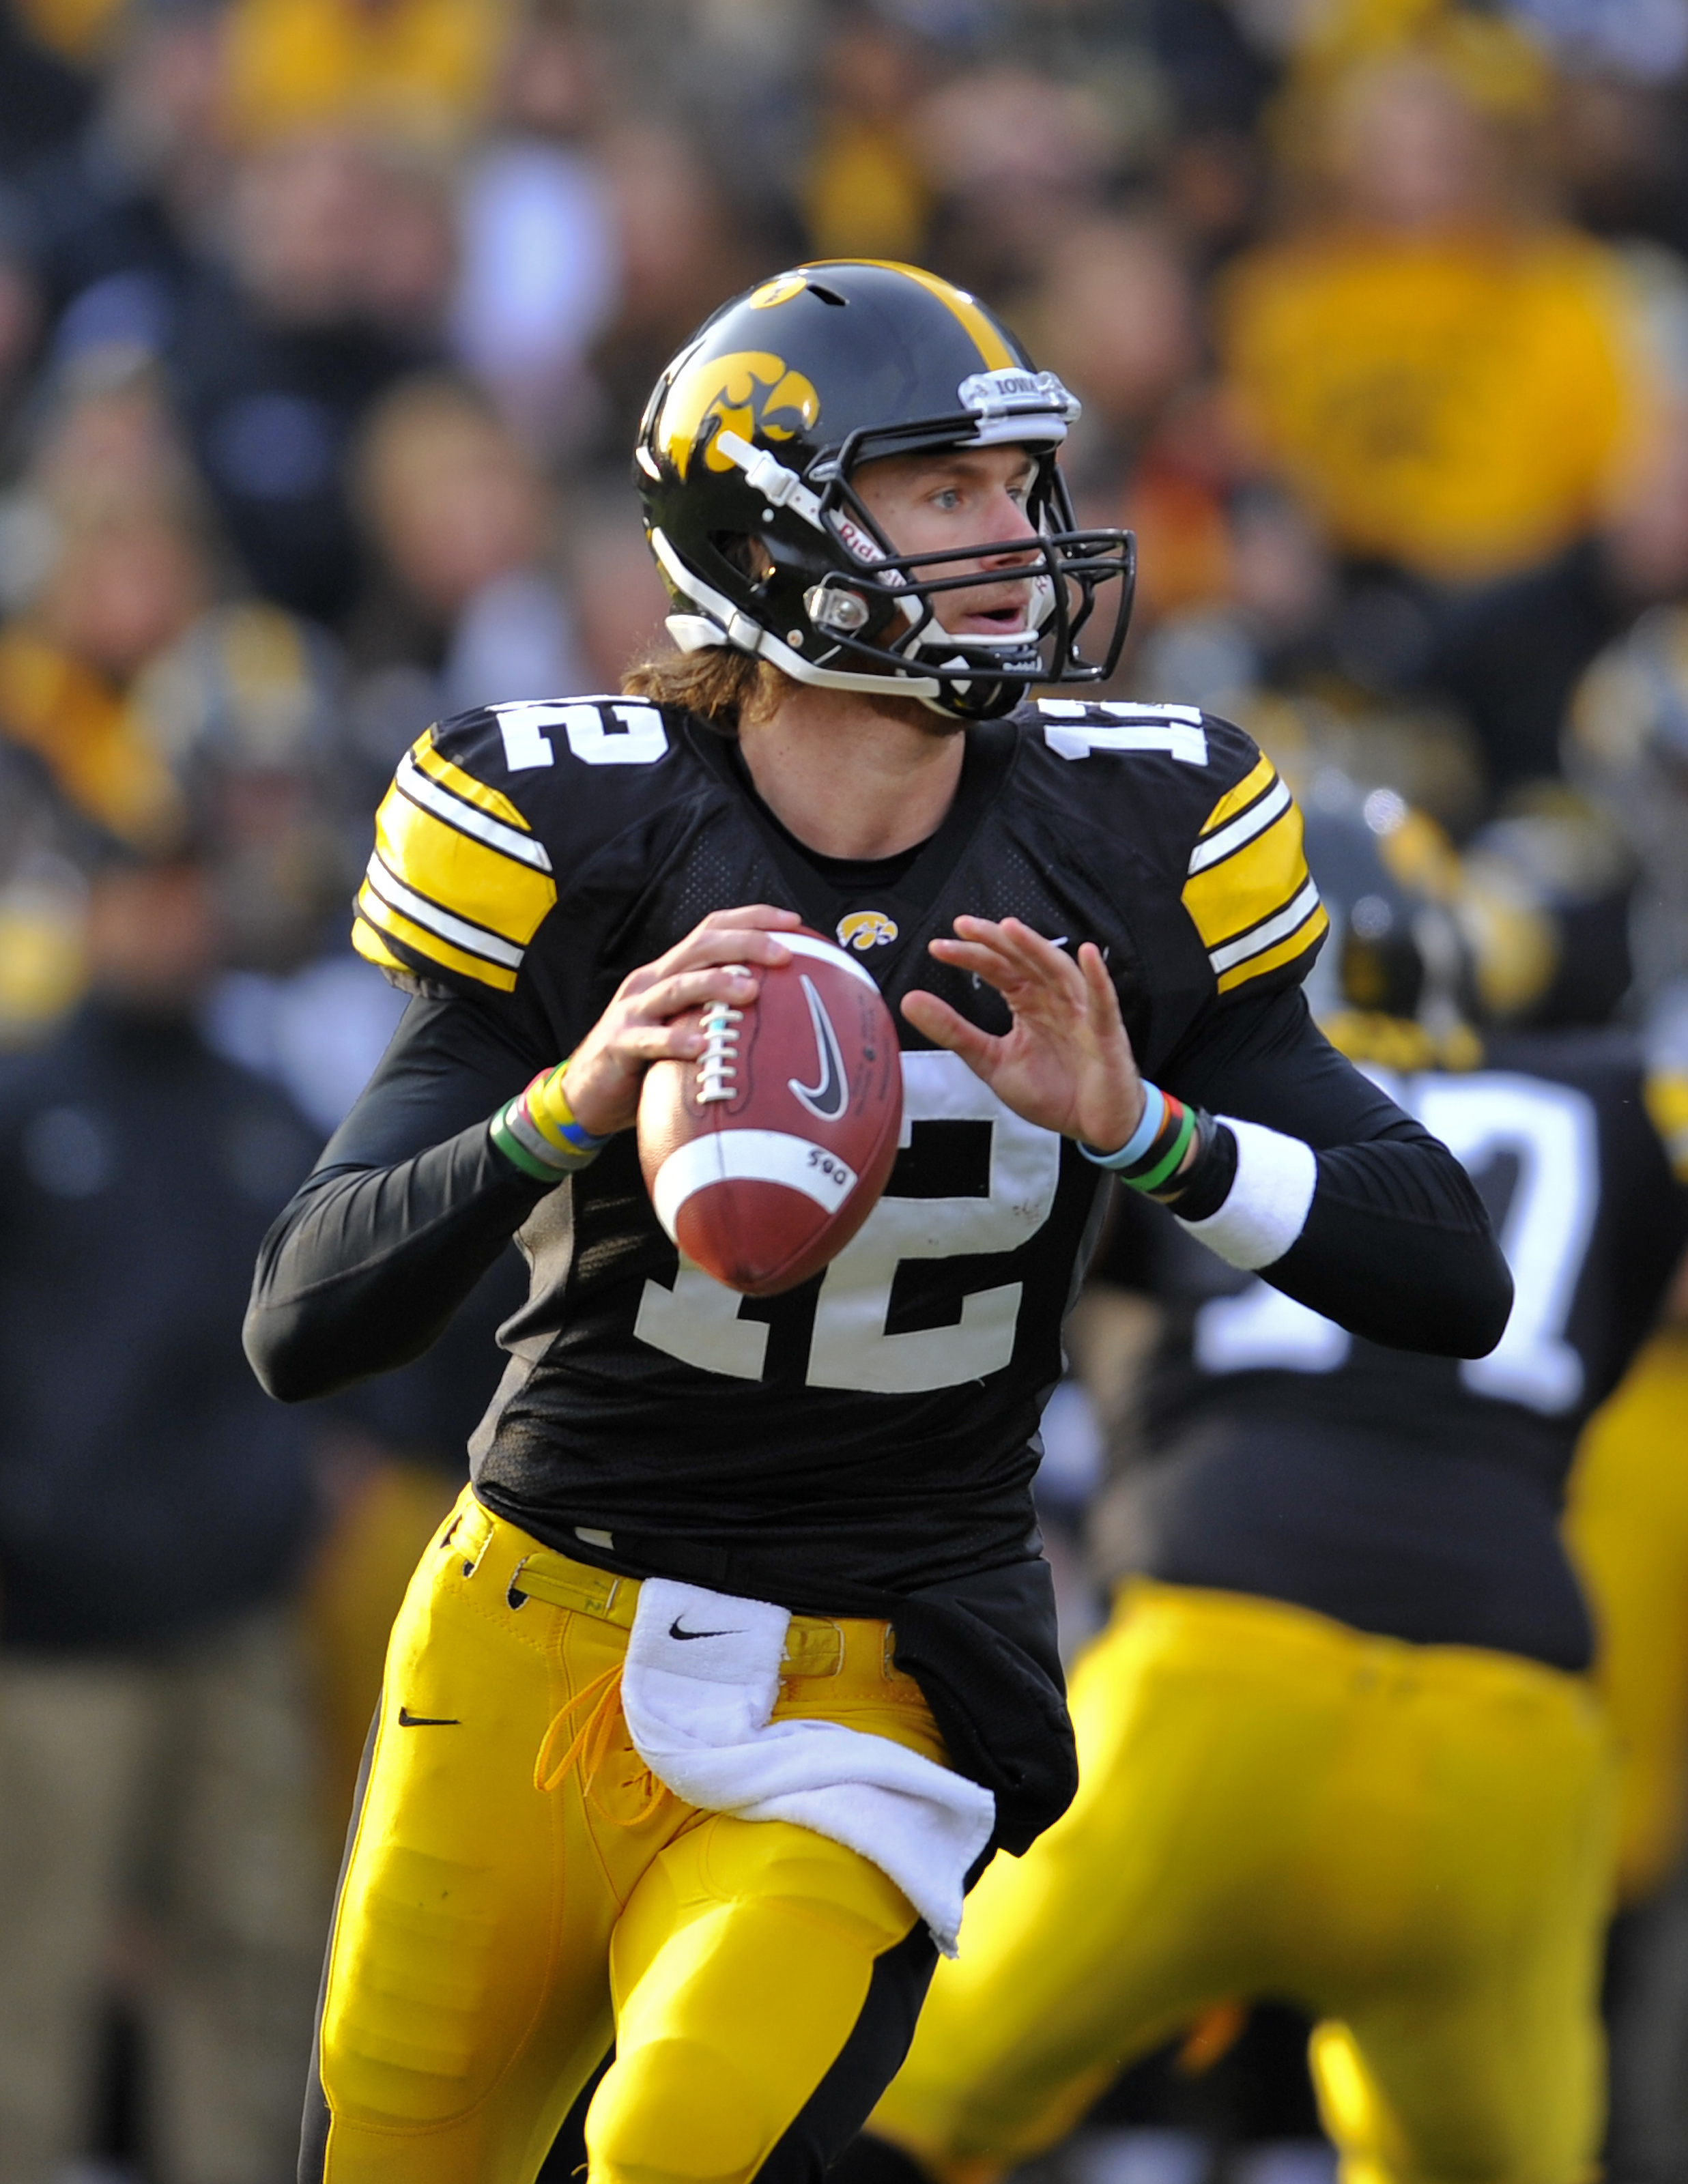 IOWA CITY, IA - NOVEMBER 20:  Quarterback Ricky Stanzi #12 of the University of Iowa Hawkeyes throws under pressure from Ohio State Buckeyes defenders during the first half of play at Kinnick Stadium on November 20, 2010 in Iowa City, Iowa. Ohio State won